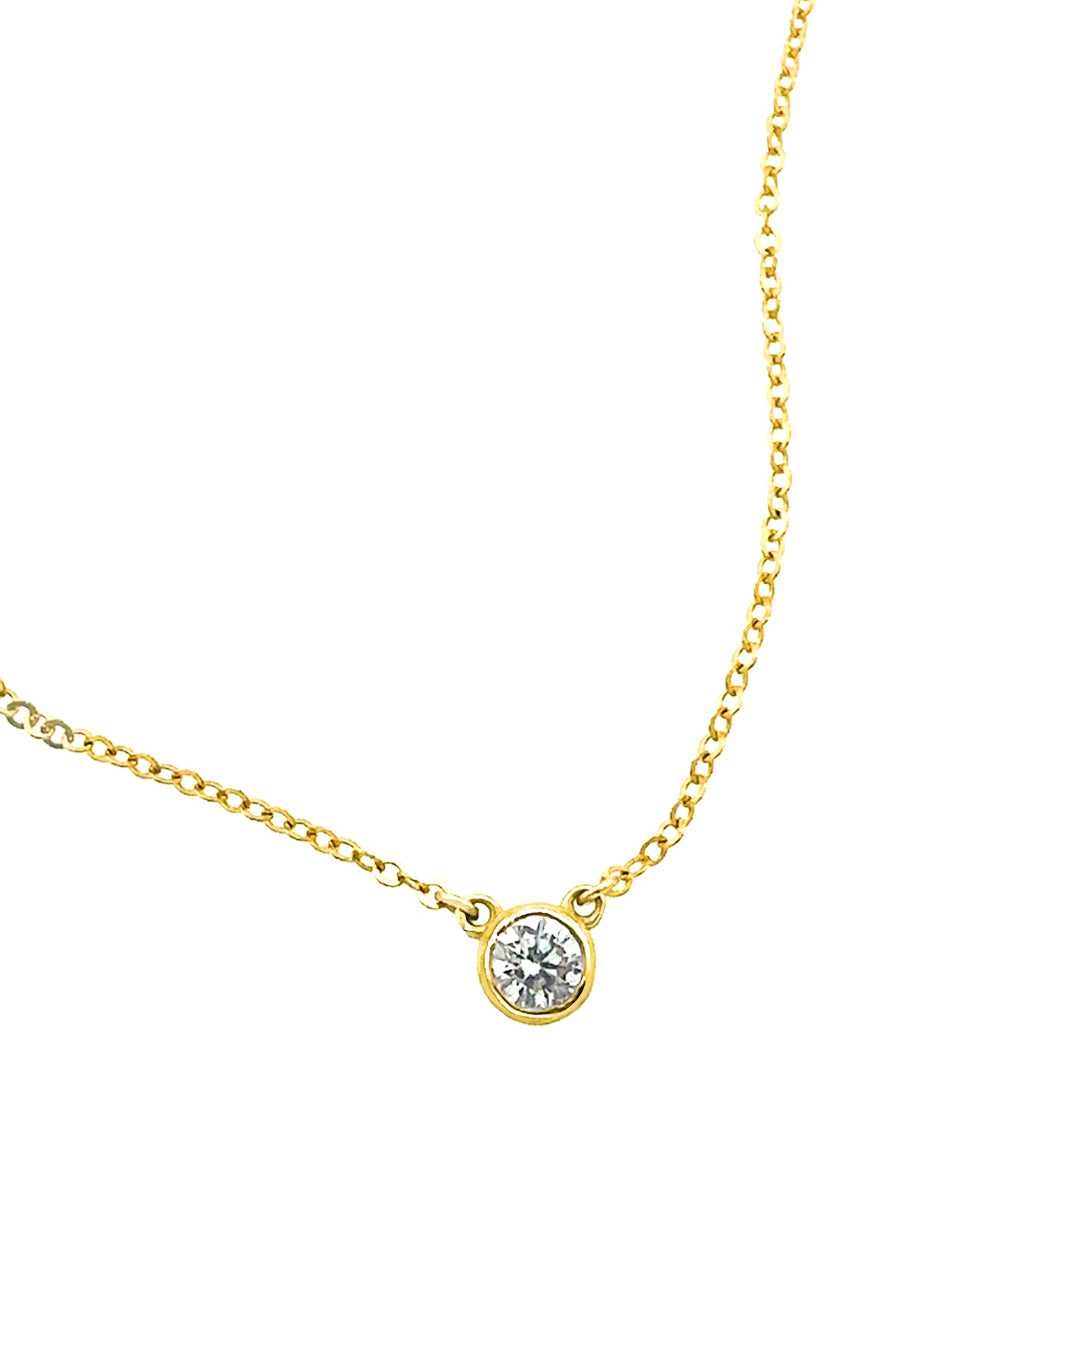 14k gold fill classic solitaire choker necklace with bezel white diamond centre 